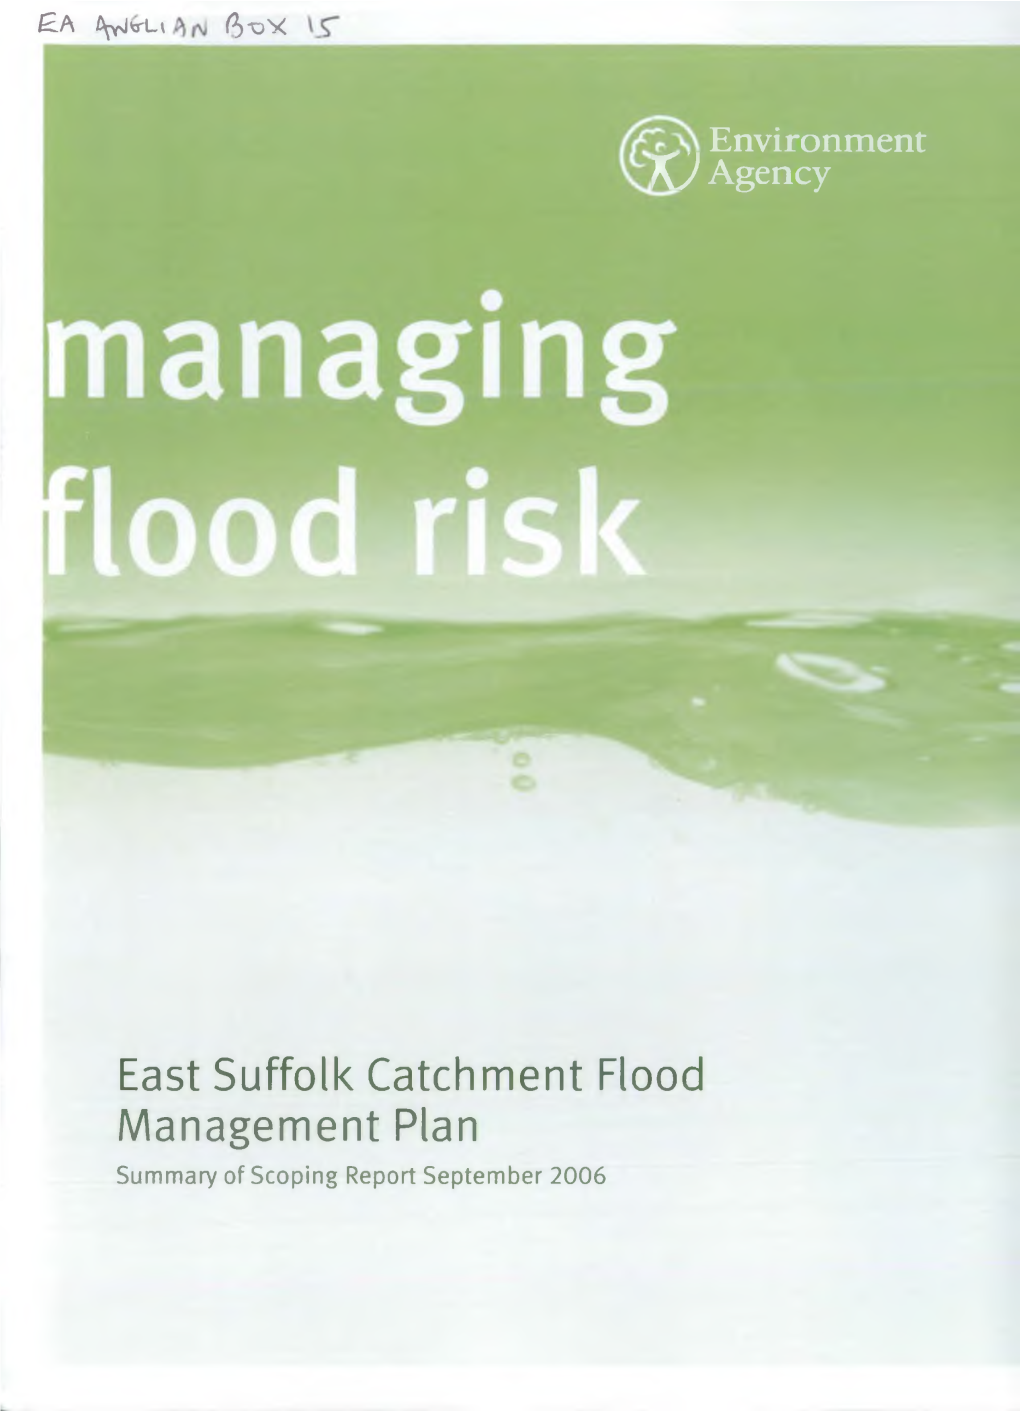 East Suffolk Catchment Flood Management Plan Summary of Scoping Report September 2006